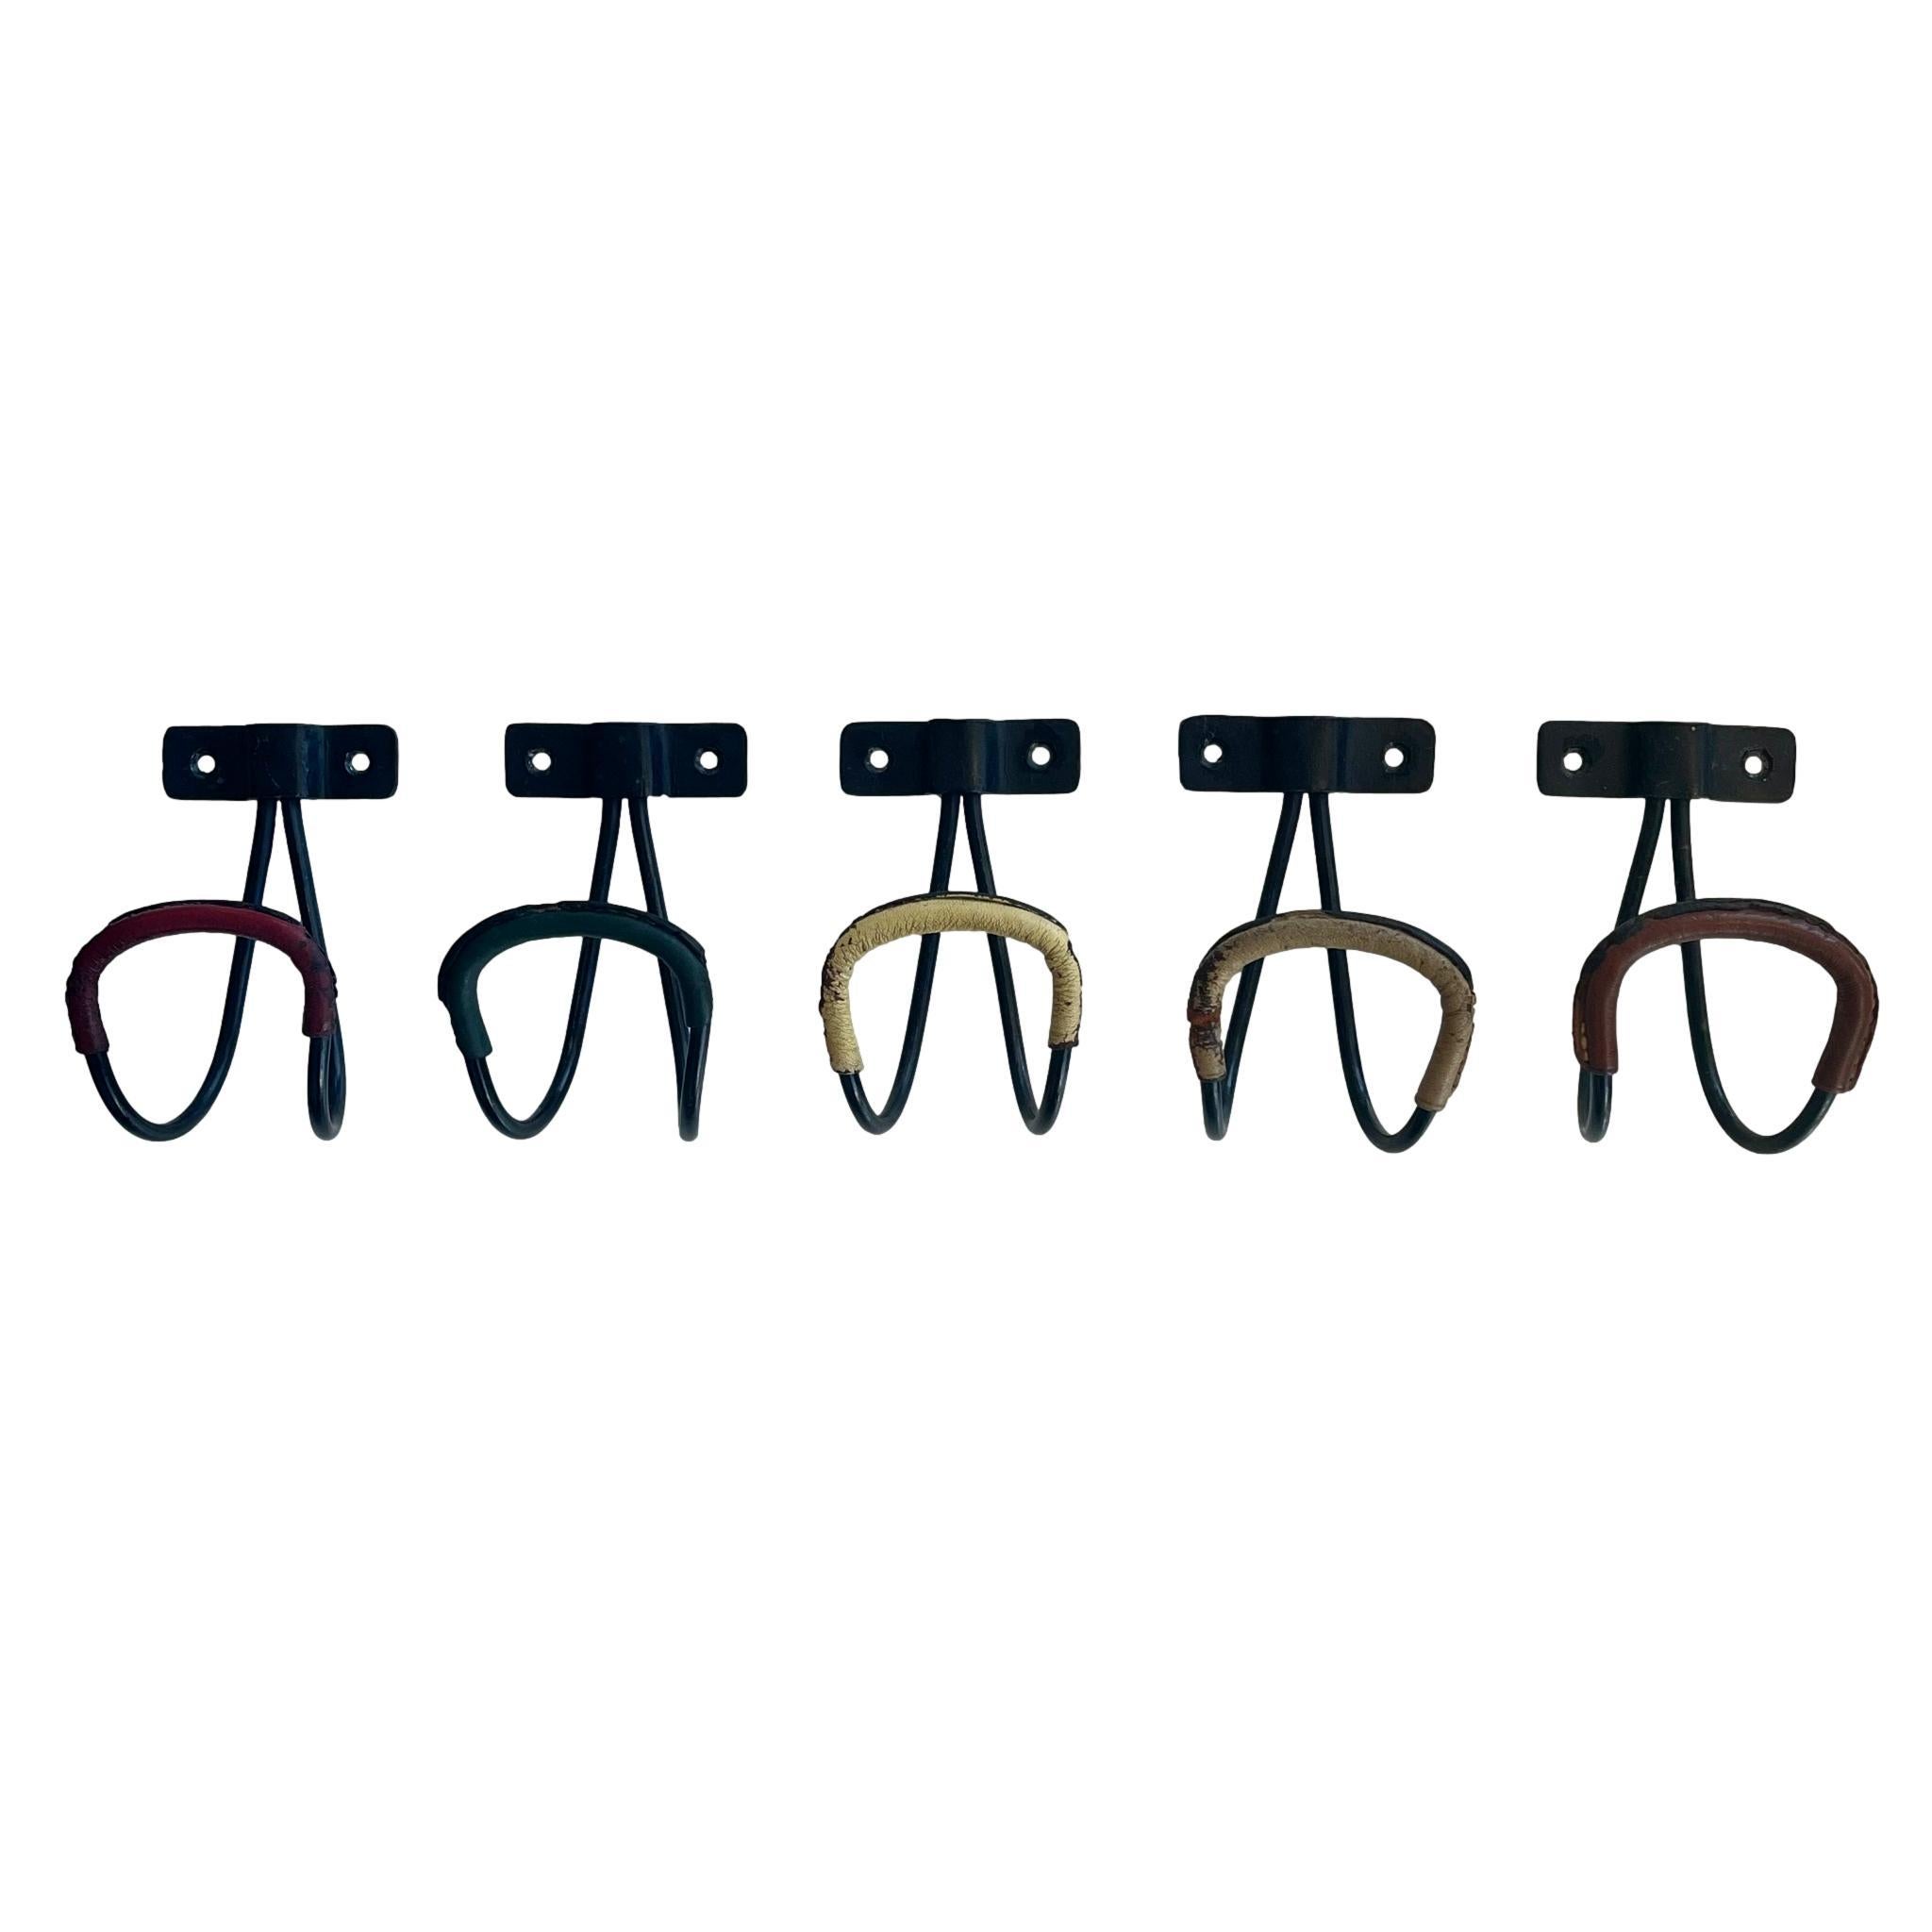 Amazing collection of wall hooks by French designer Jacques Adnet. Perfect for hats or coats. Iron frame with leather wrapped hooks. Saddle brown, off-white, yellow, red and green colors. All finished with signature Adnet contrast stitching. Sold as